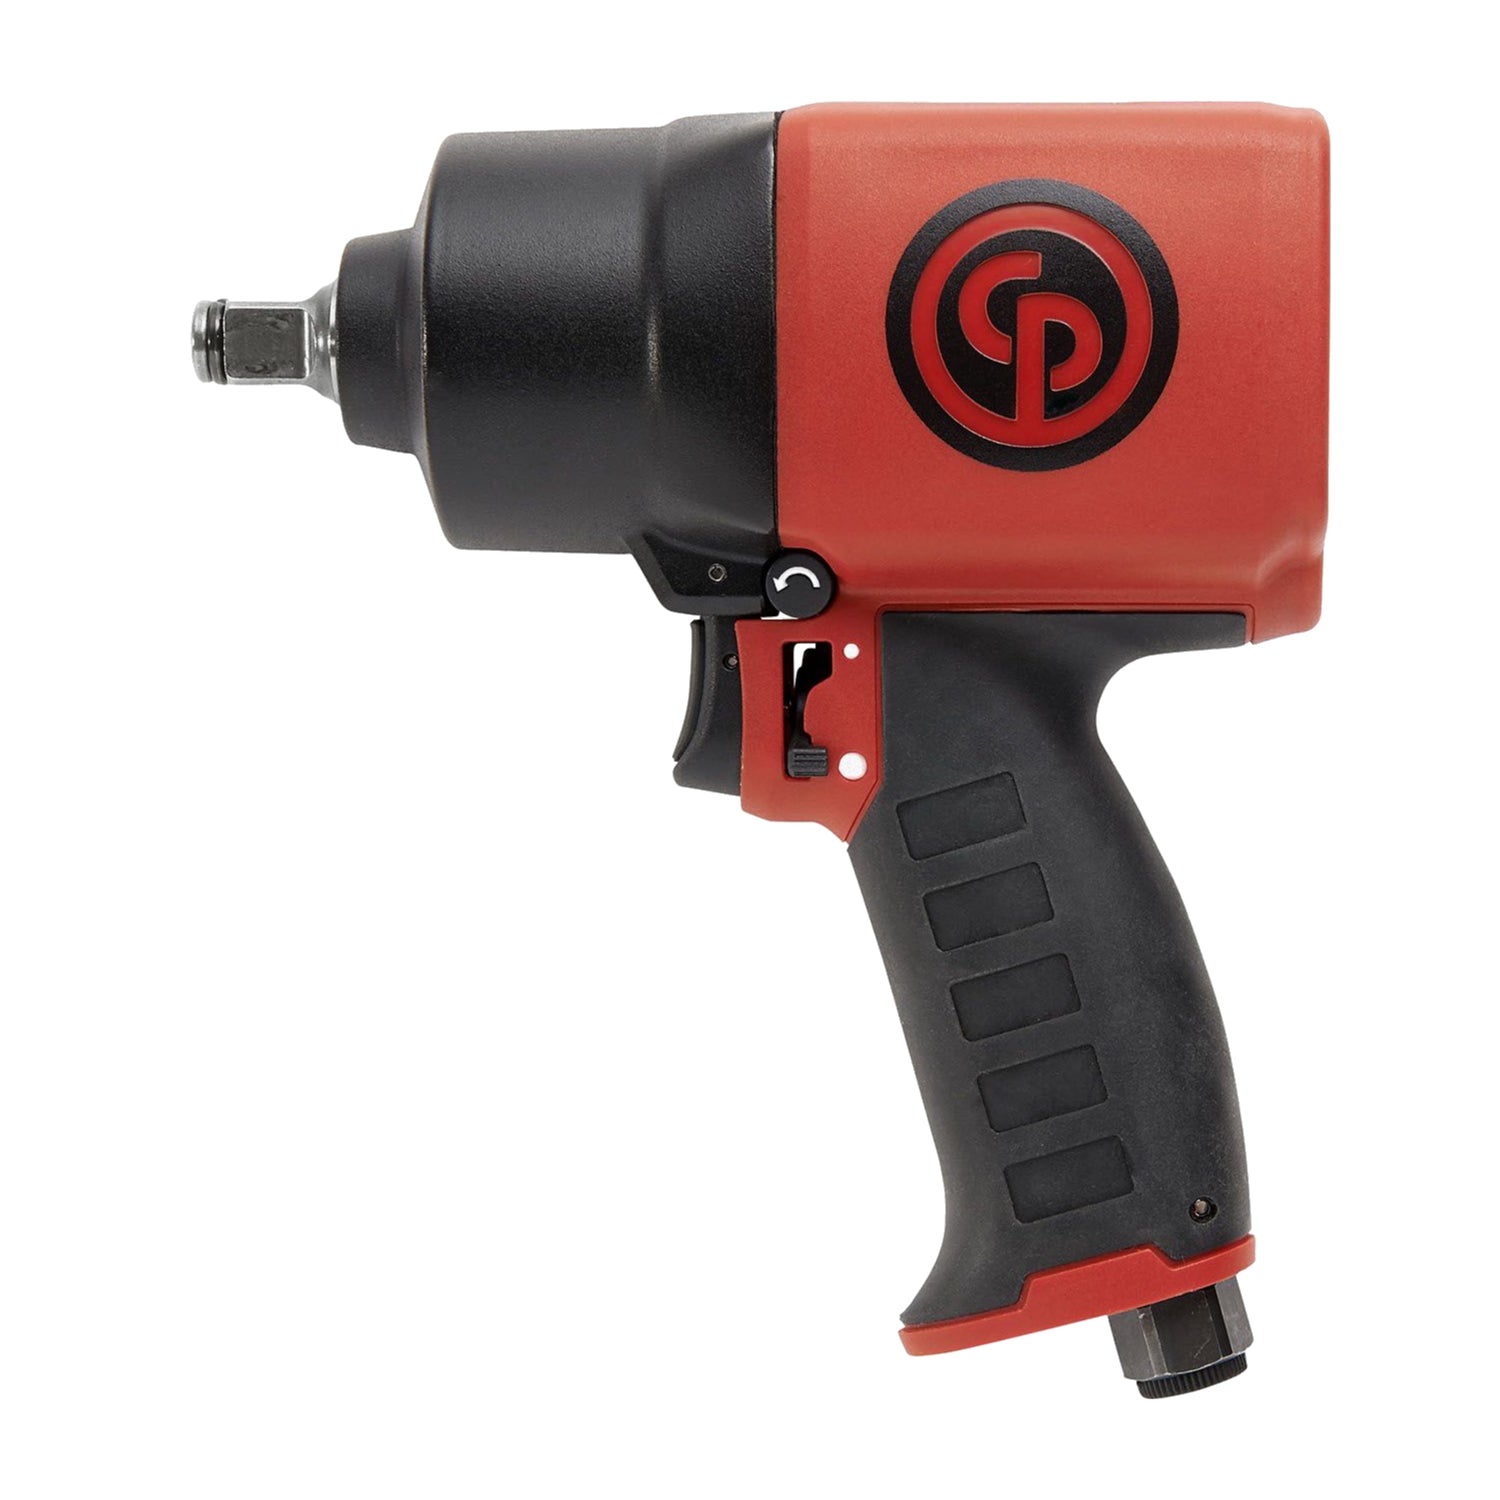 Chicago Pneumatic CP7749 1/2" Short Shank 725 Ft/Lbs Impact Wrench